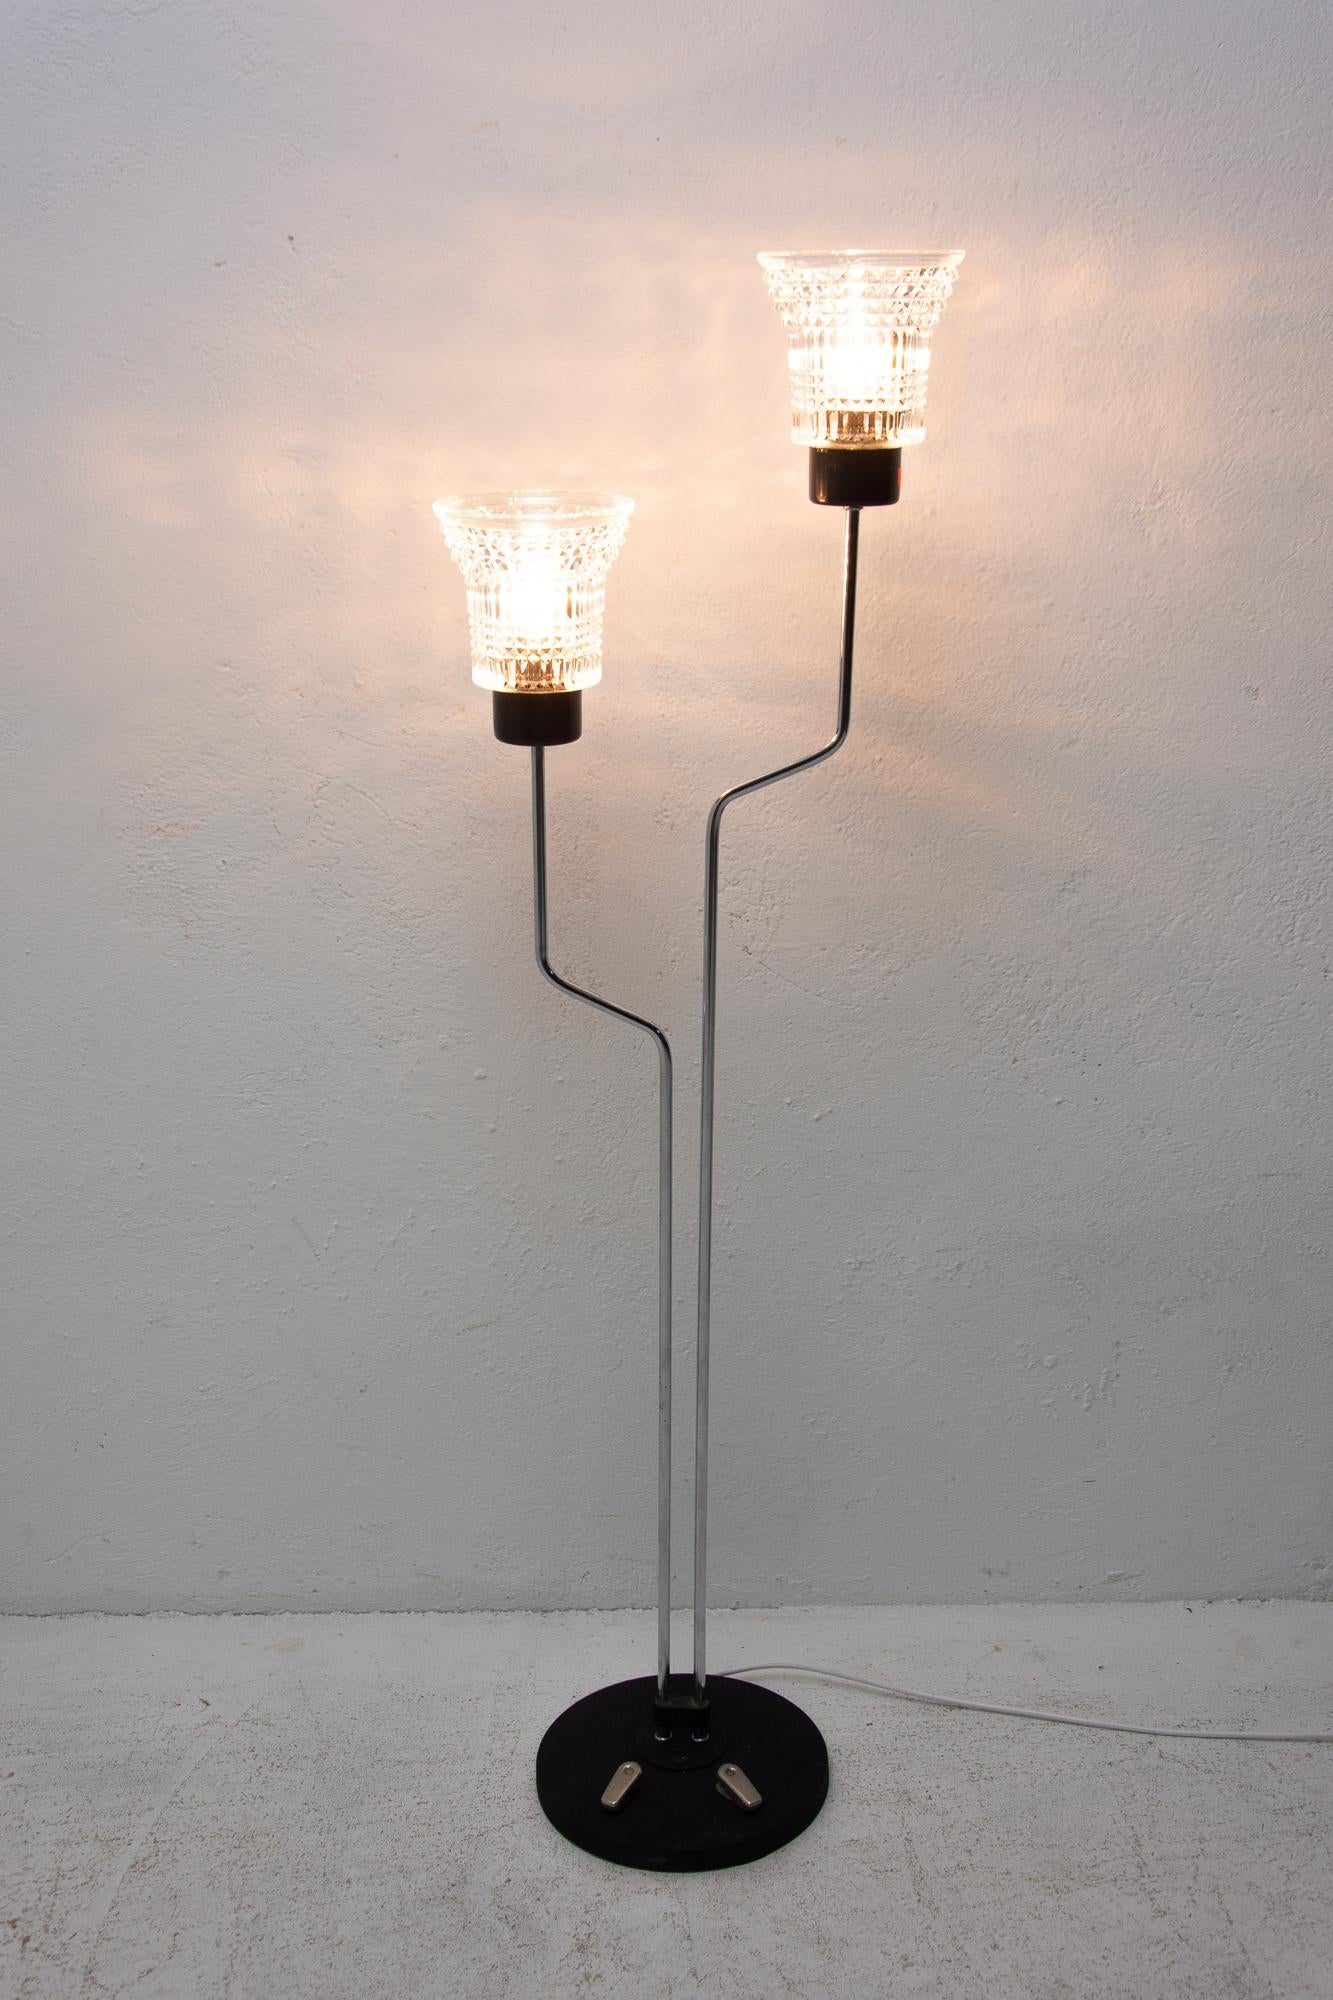 Midcentury floor lamp, made in the former Czechoslovakia in the 1960s. Chrome-plated curved construction. Two staggered chromed stems ending in the glass shades. A round wooden base with two foot switches. In very good vintage condition. New